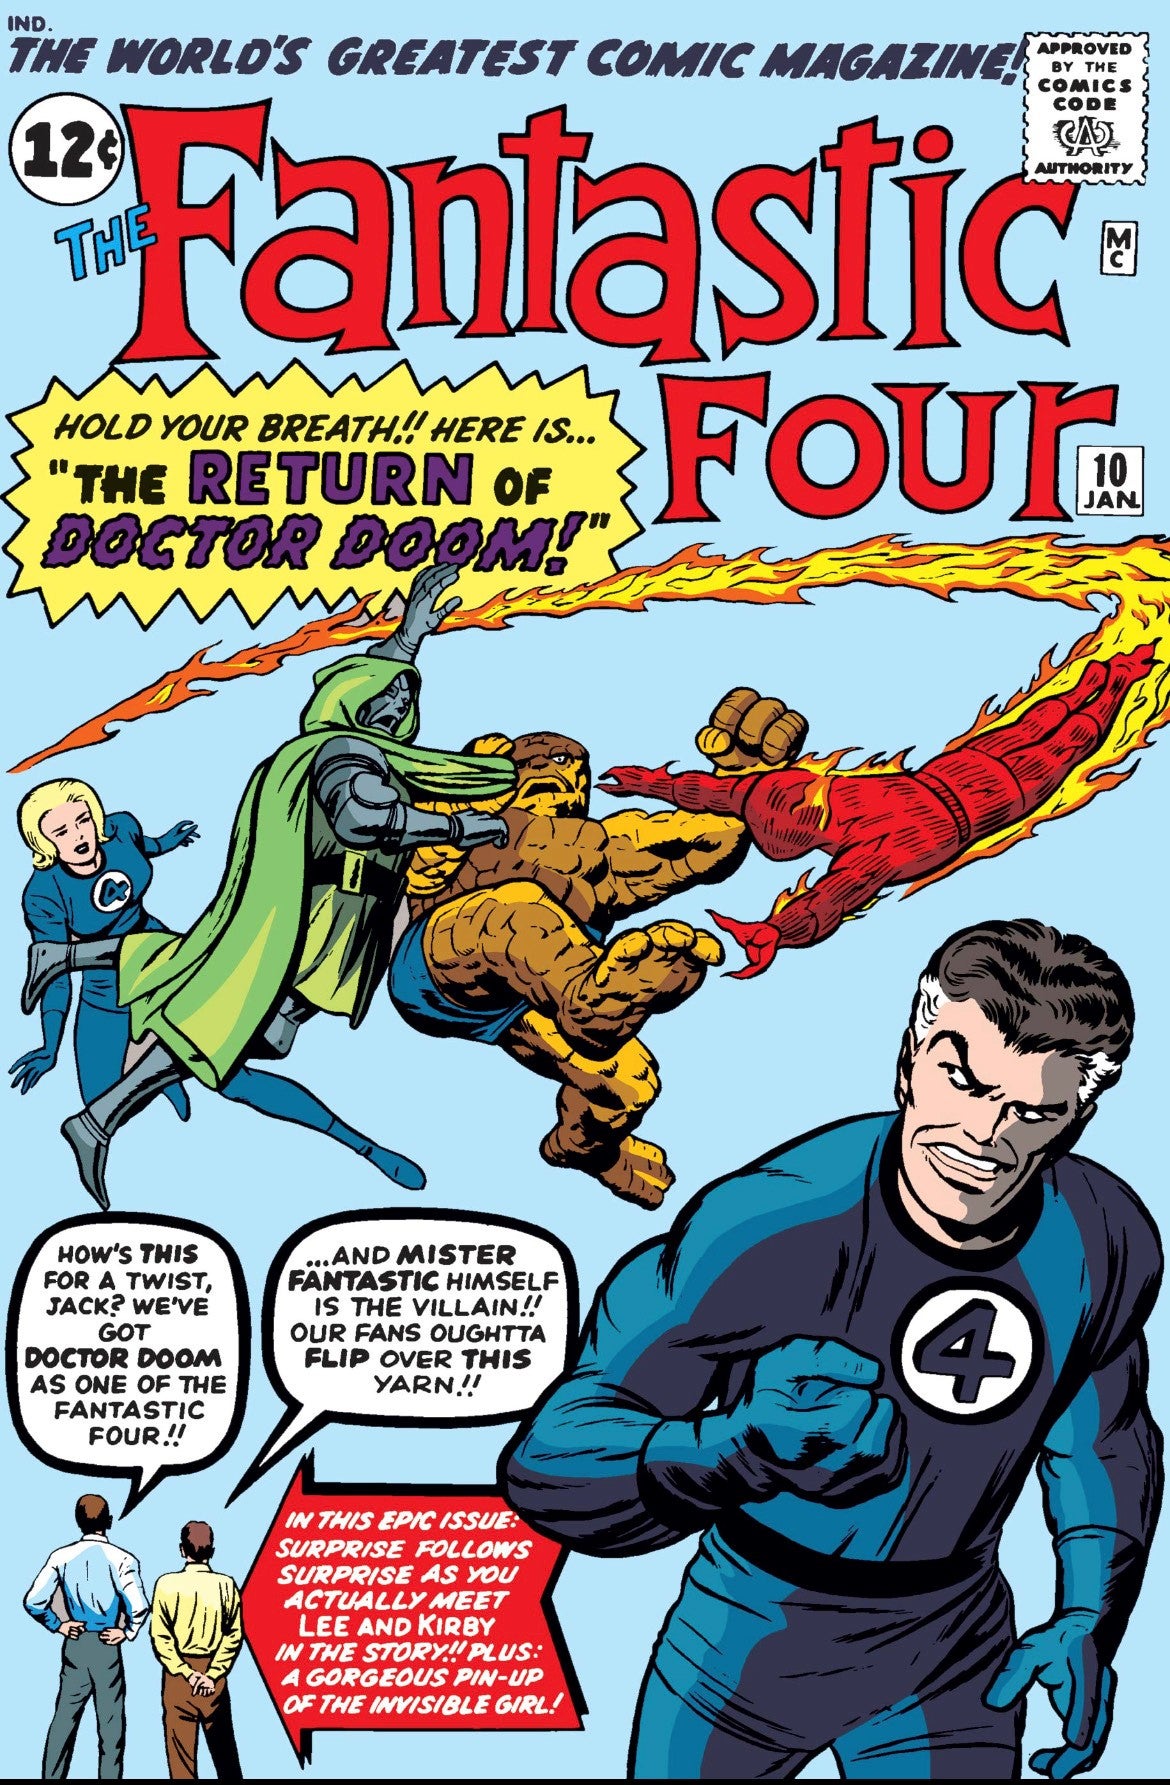 Cover of Fantastic Four featuring the FF battling and Kirby and Lee looking towards them